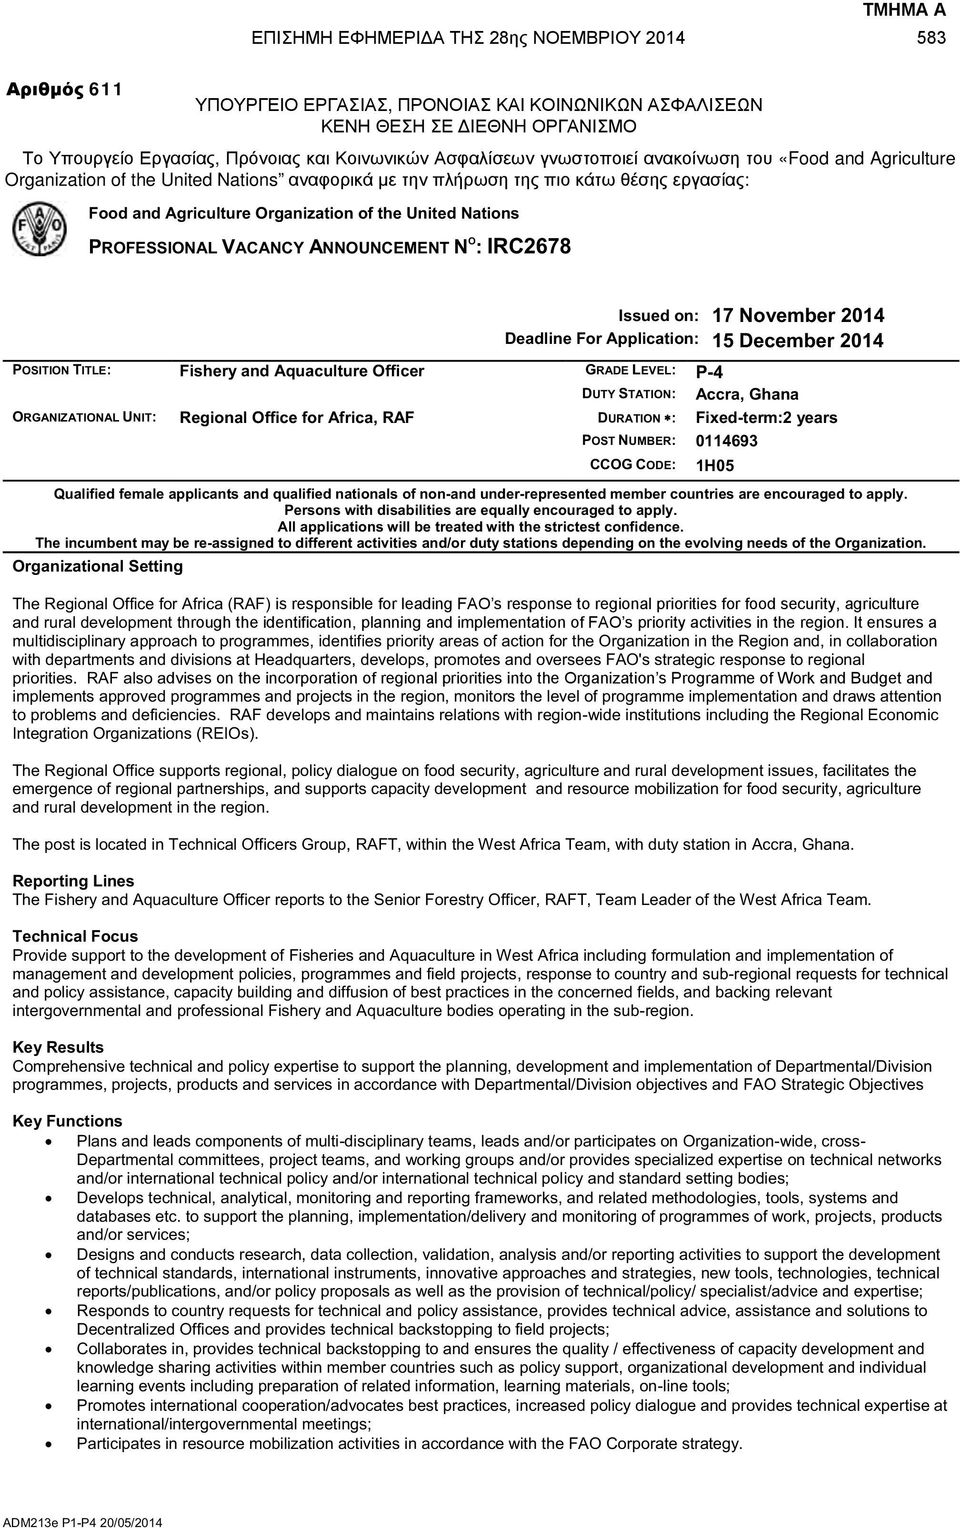 Nations PROFESSIONAL VACANCY ANNOUNCEMENT N O : IRC2678 Issued on: 17 November 2014 Deadline For Application: 15 December 2014 POSITION TITLE: Fishery and Aquaculture Officer GRADE LEVEL: P-4 DUTY